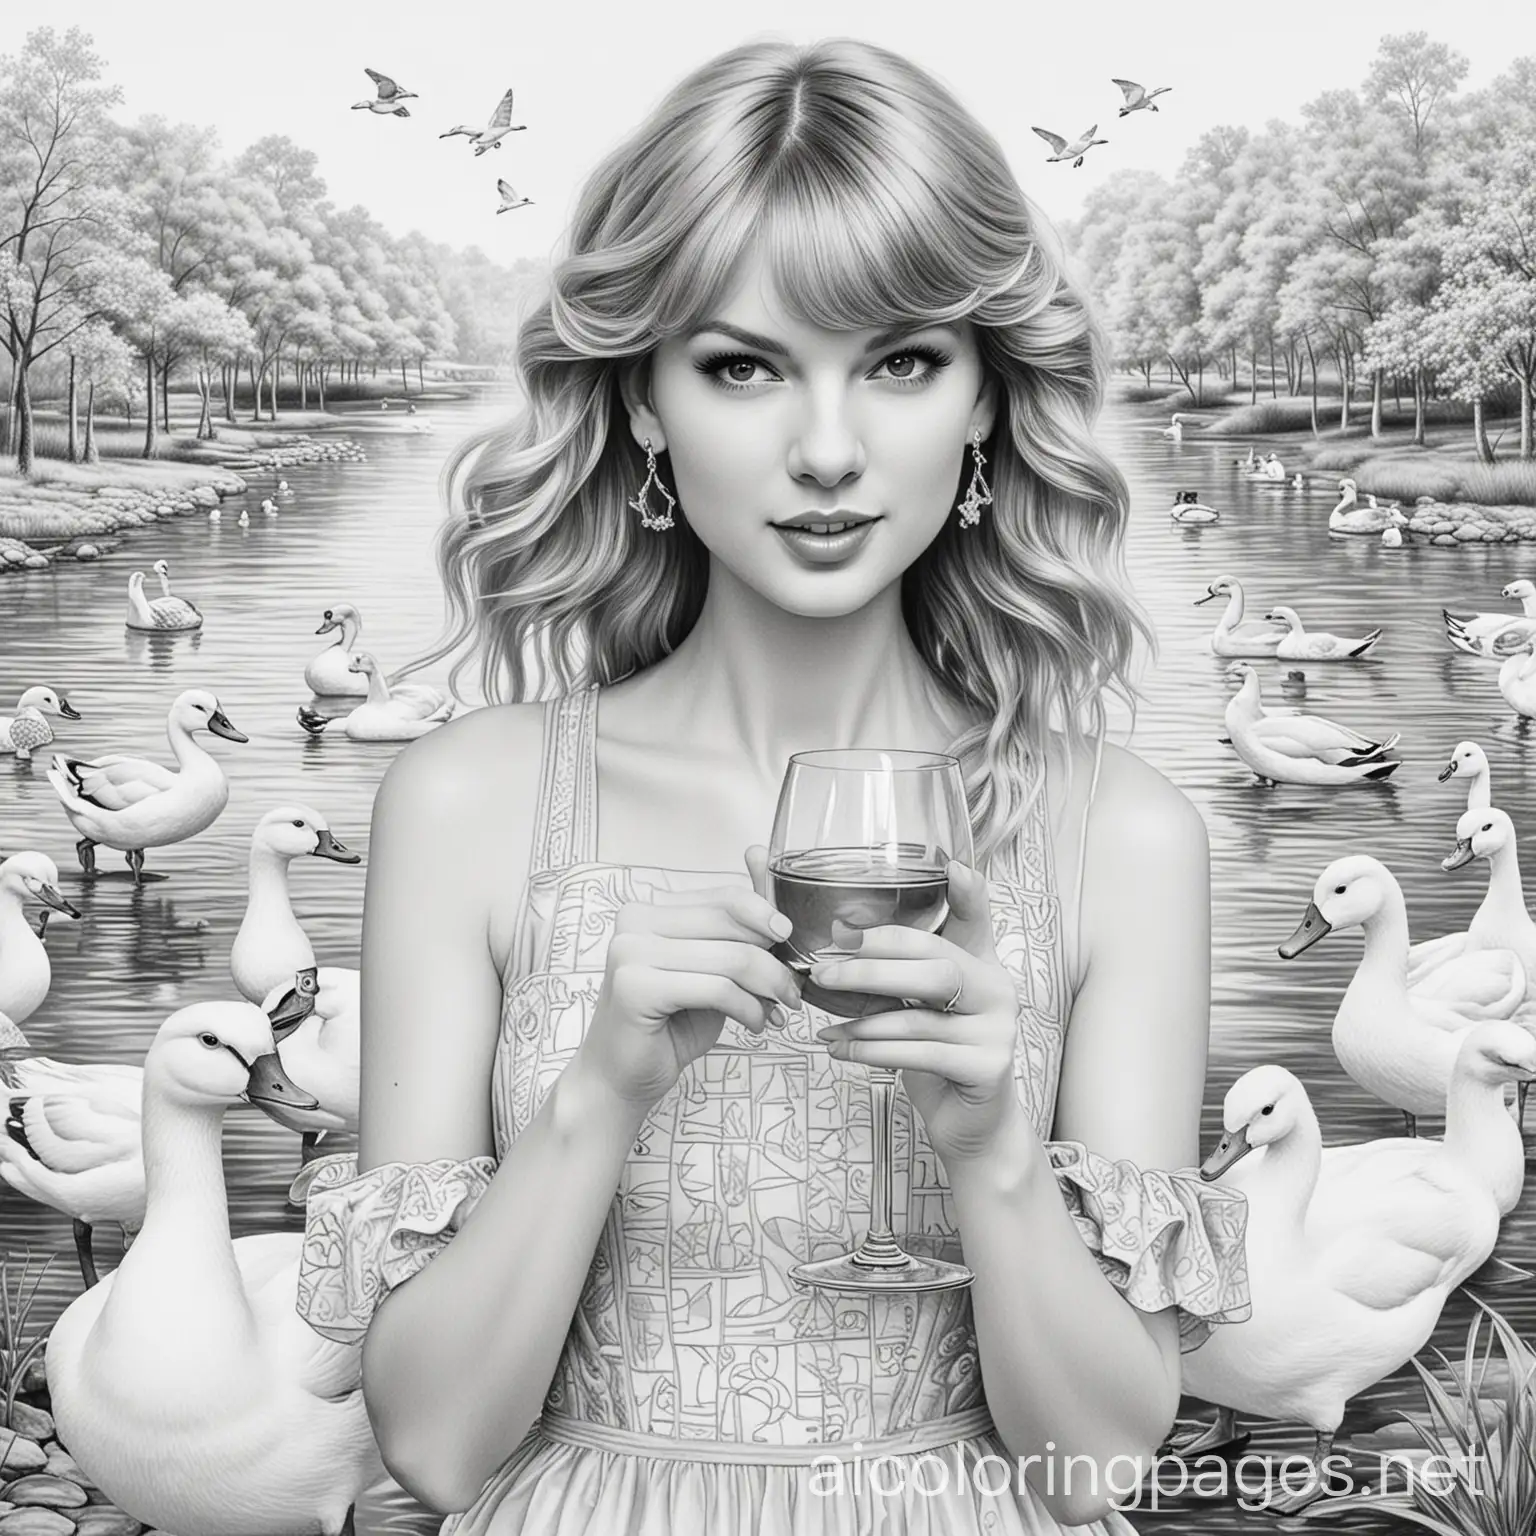 Taylor swift coloring page. She is holding an aperol spritz, and surrounded by ducks, Coloring Page, black and white, line art, white background, Simplicity, Ample White Space. The background of the coloring page is plain white to make it easy for young children to color within the lines. The outlines of all the subjects are easy to distinguish, making it simple for kids to color without too much difficulty